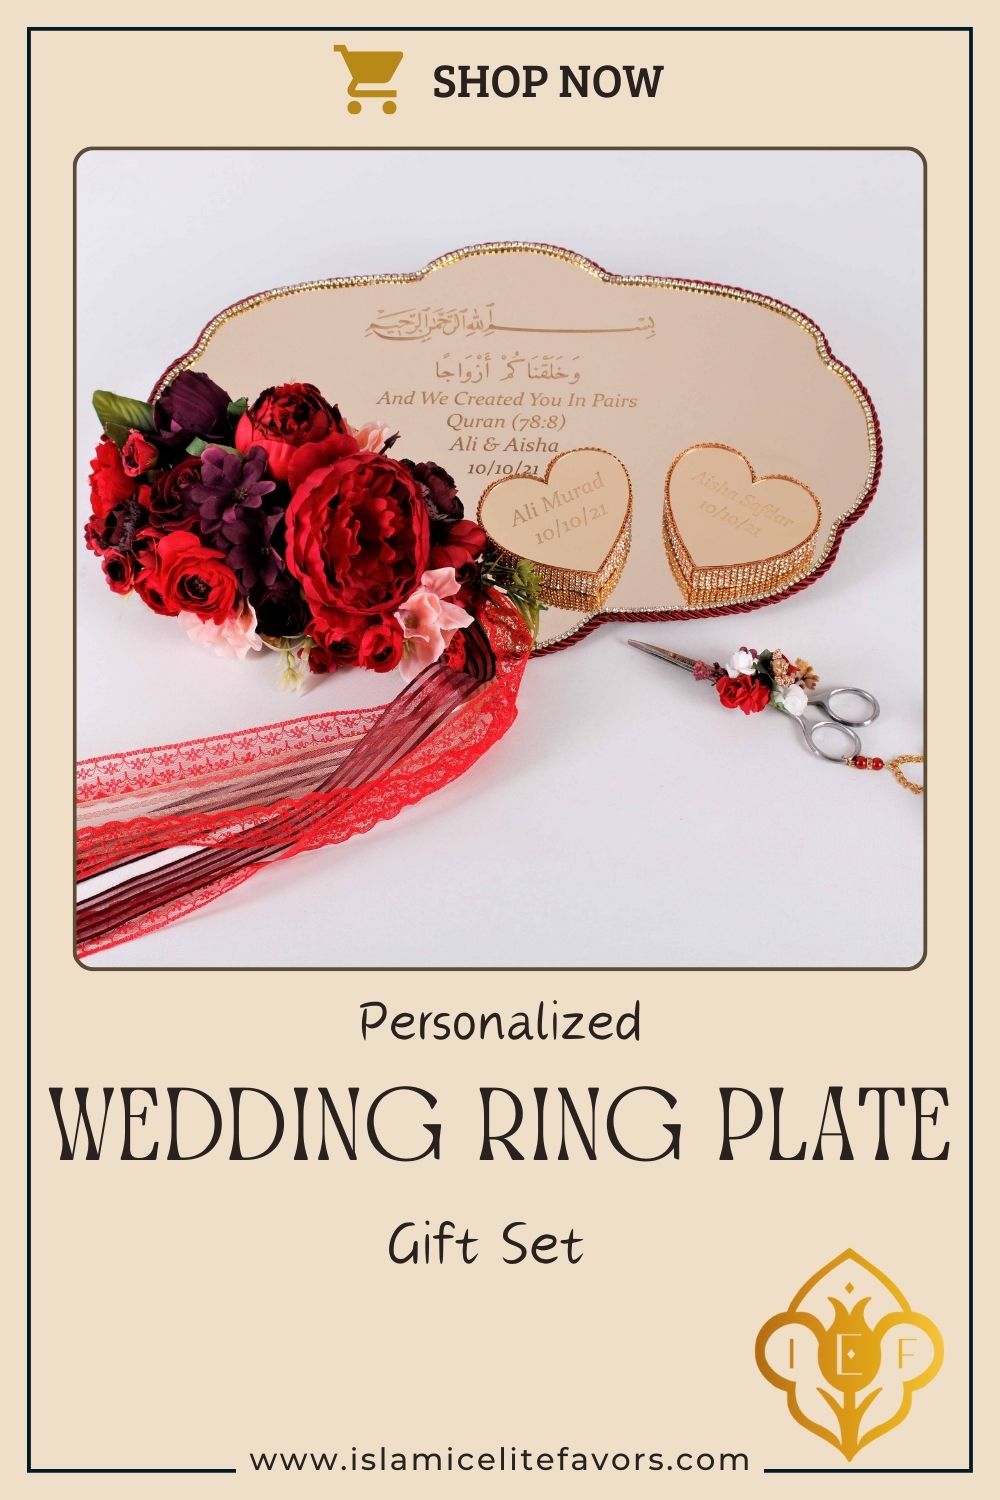 Personalized Wedding Ring Plate Heart Shape Ring Box Scissor Gift Set - Islamic Elite Favors is a handmade gift shop offering a wide variety of unique and personalized gifts for all occasions. Whether you're looking for the perfect Ramadan, Eid, Hajj, wedding gift or something special for a birthday, baby shower or anniversary, we have something for everyone. High quality, made with love.